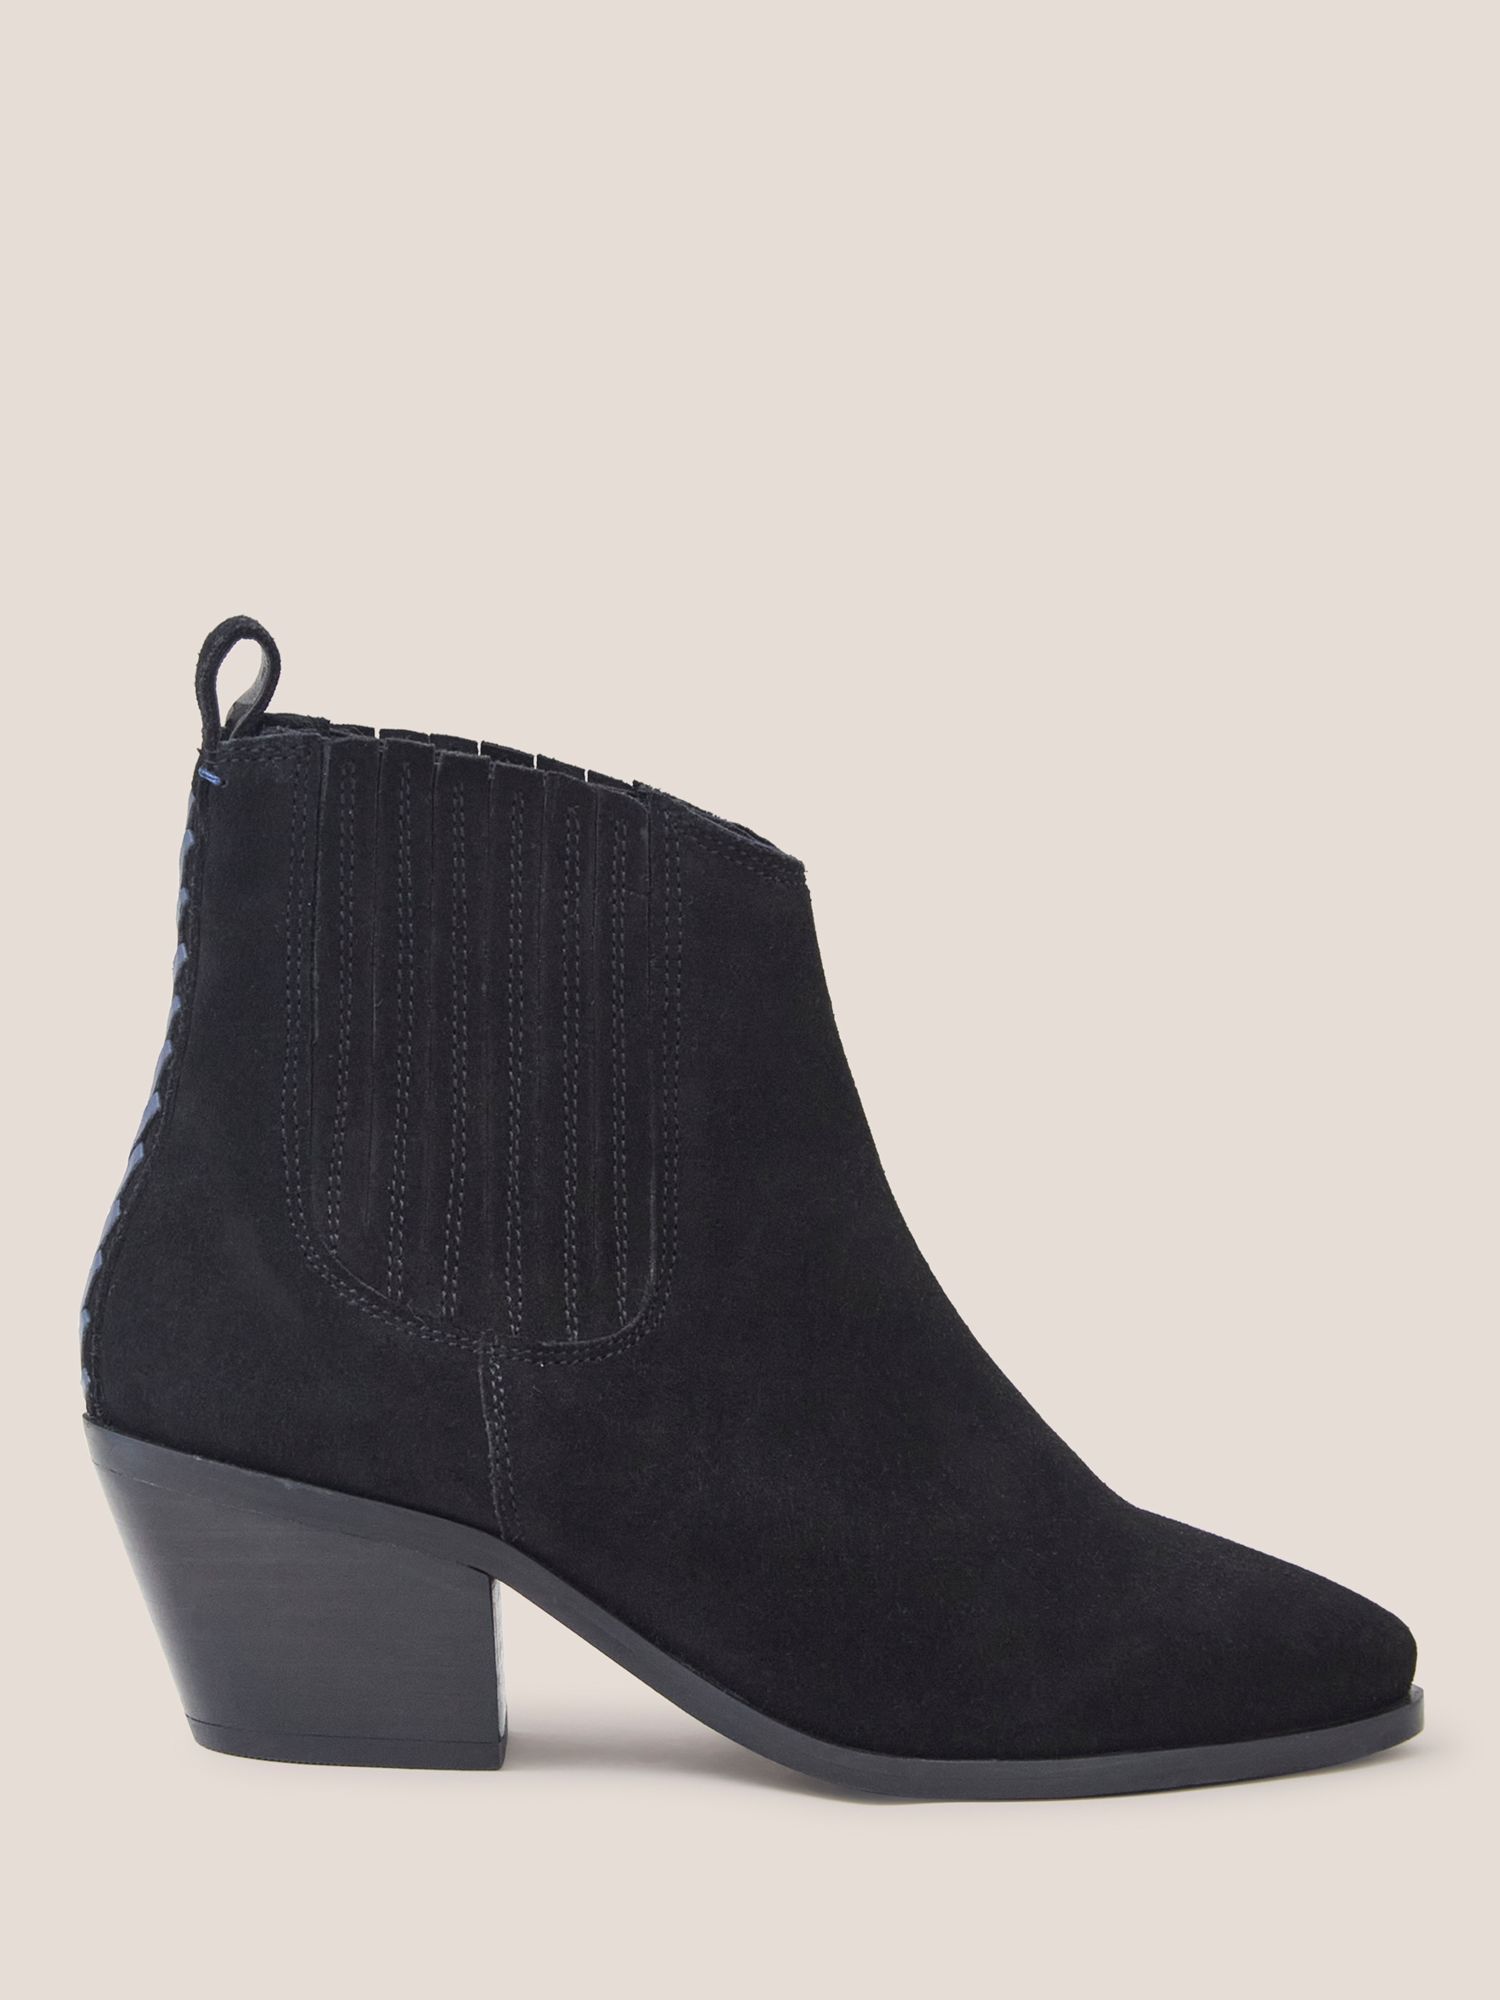 White Stuff Suede Ankle Boots, Black